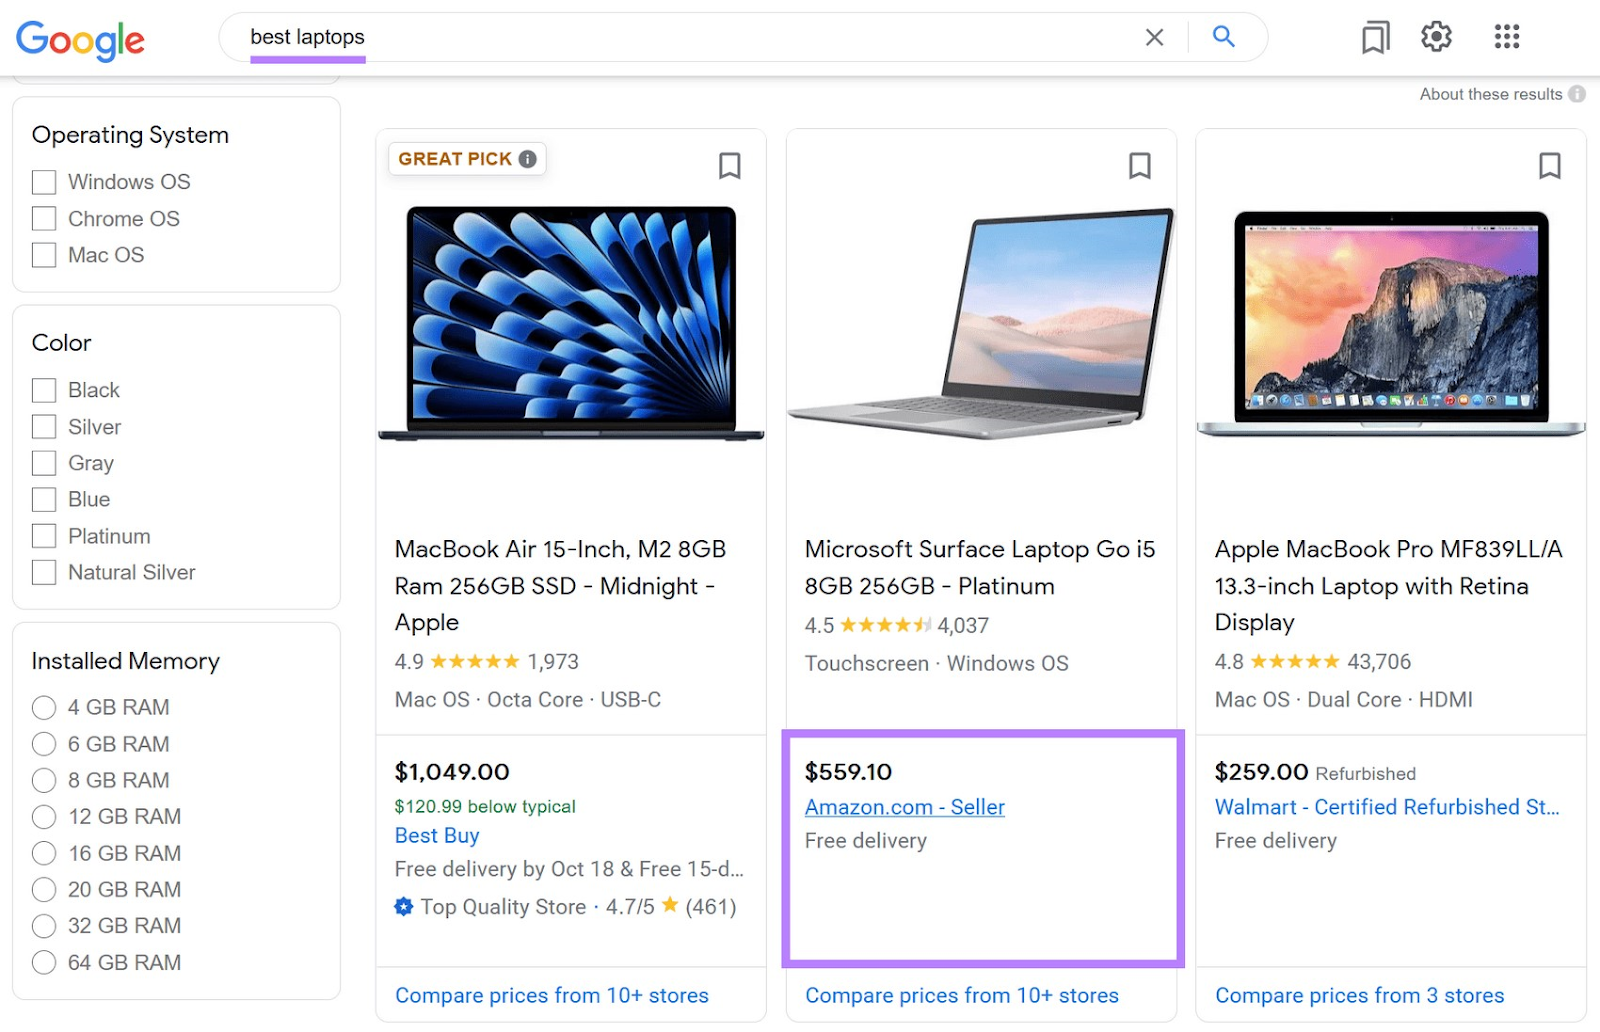 Google search for "best laptops" show Amazon listing